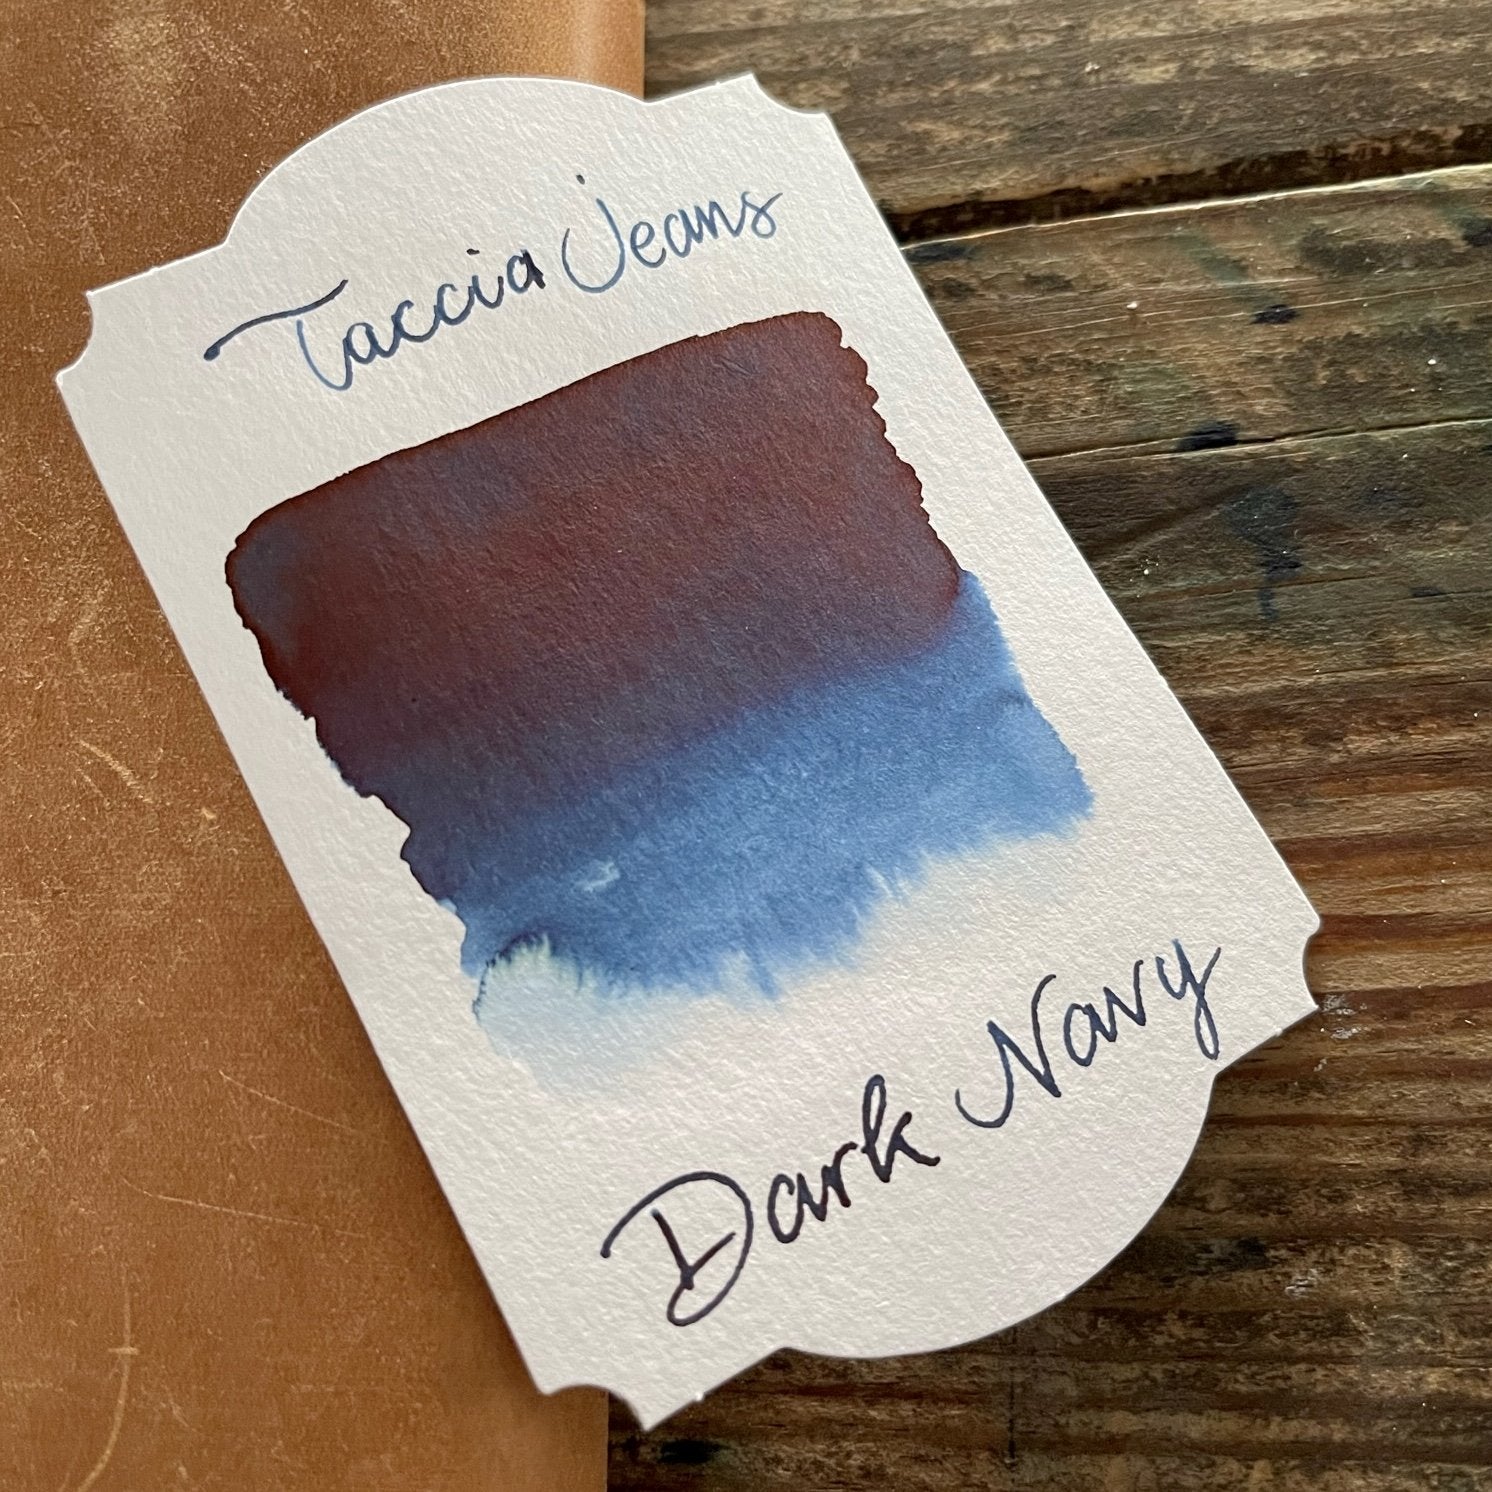 Taccia The Jeans Dark Washed Jeans Ink